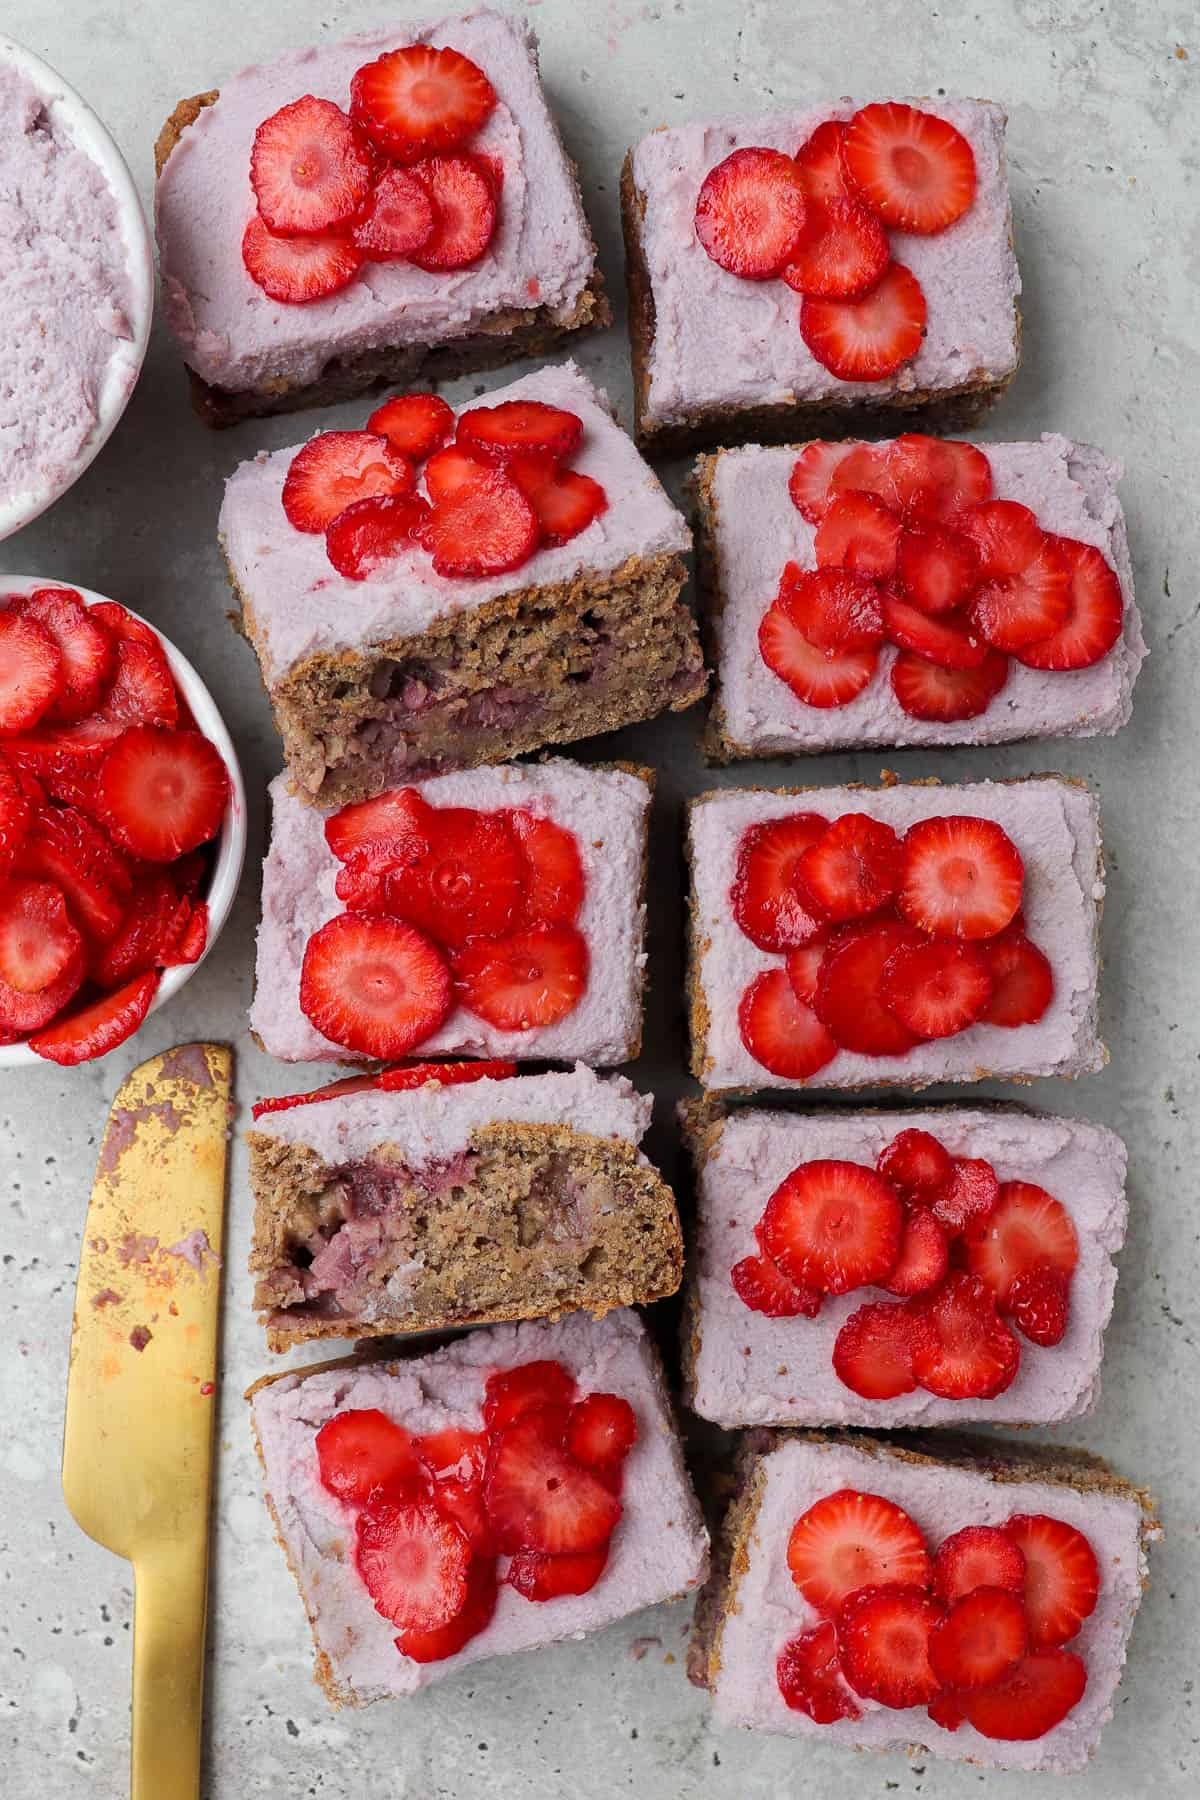 Frosted cake topped with sliced strawberries and cut up into small rectangle slices. two slices tilted on the side or an inside view.